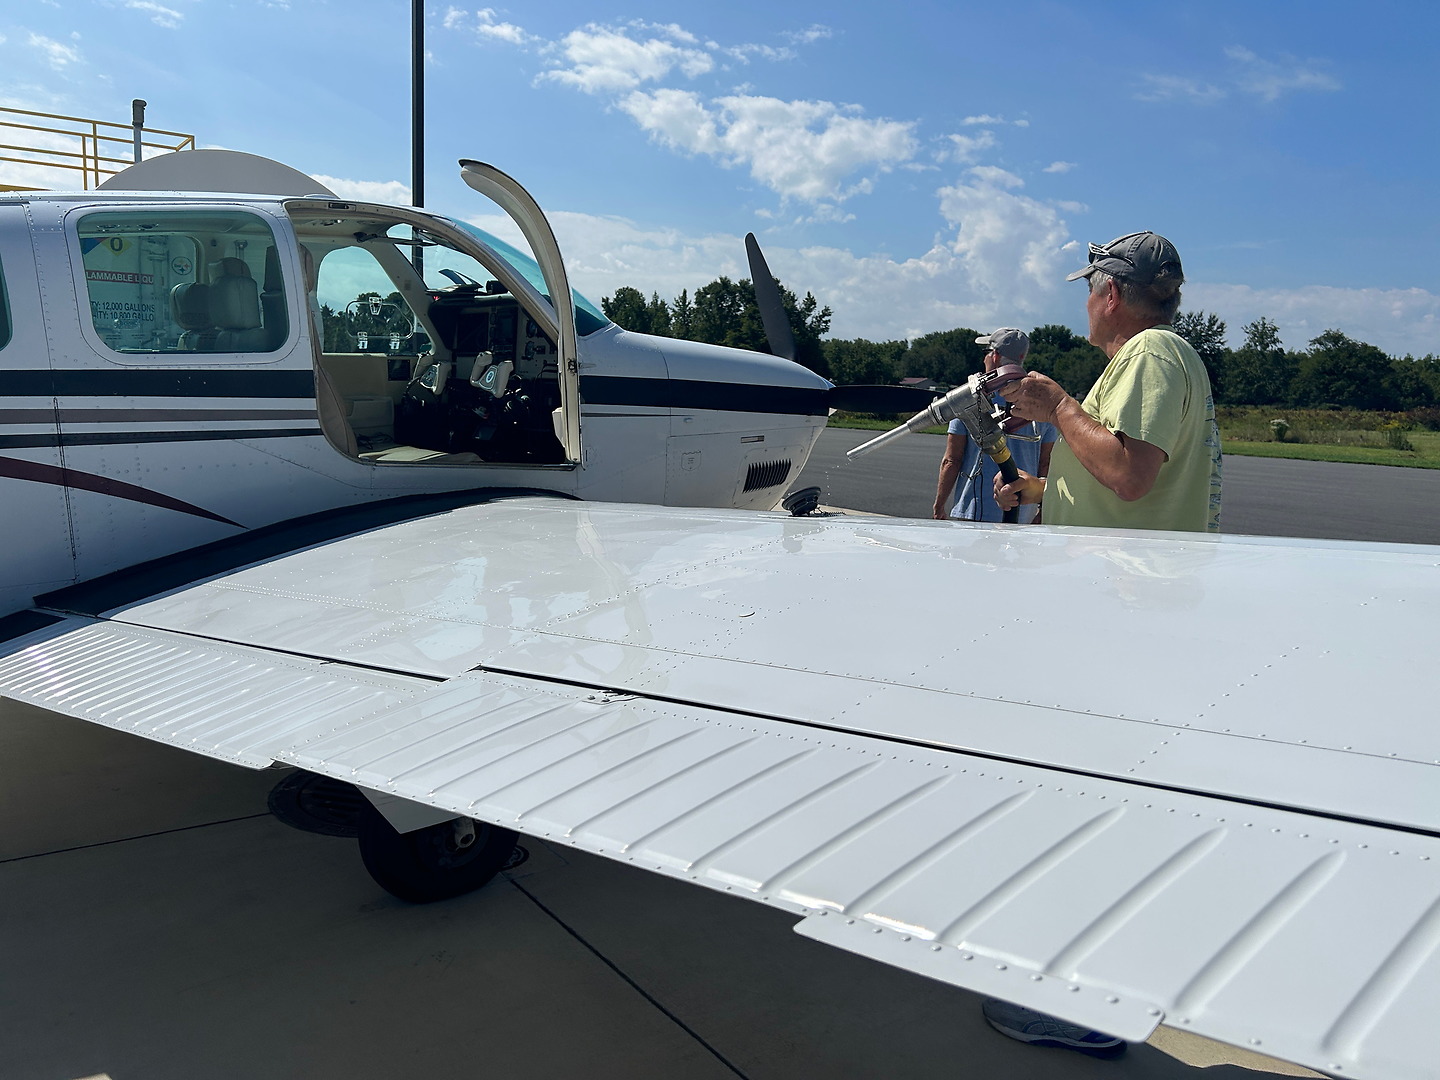 Self-fueling at Delaware Airpark